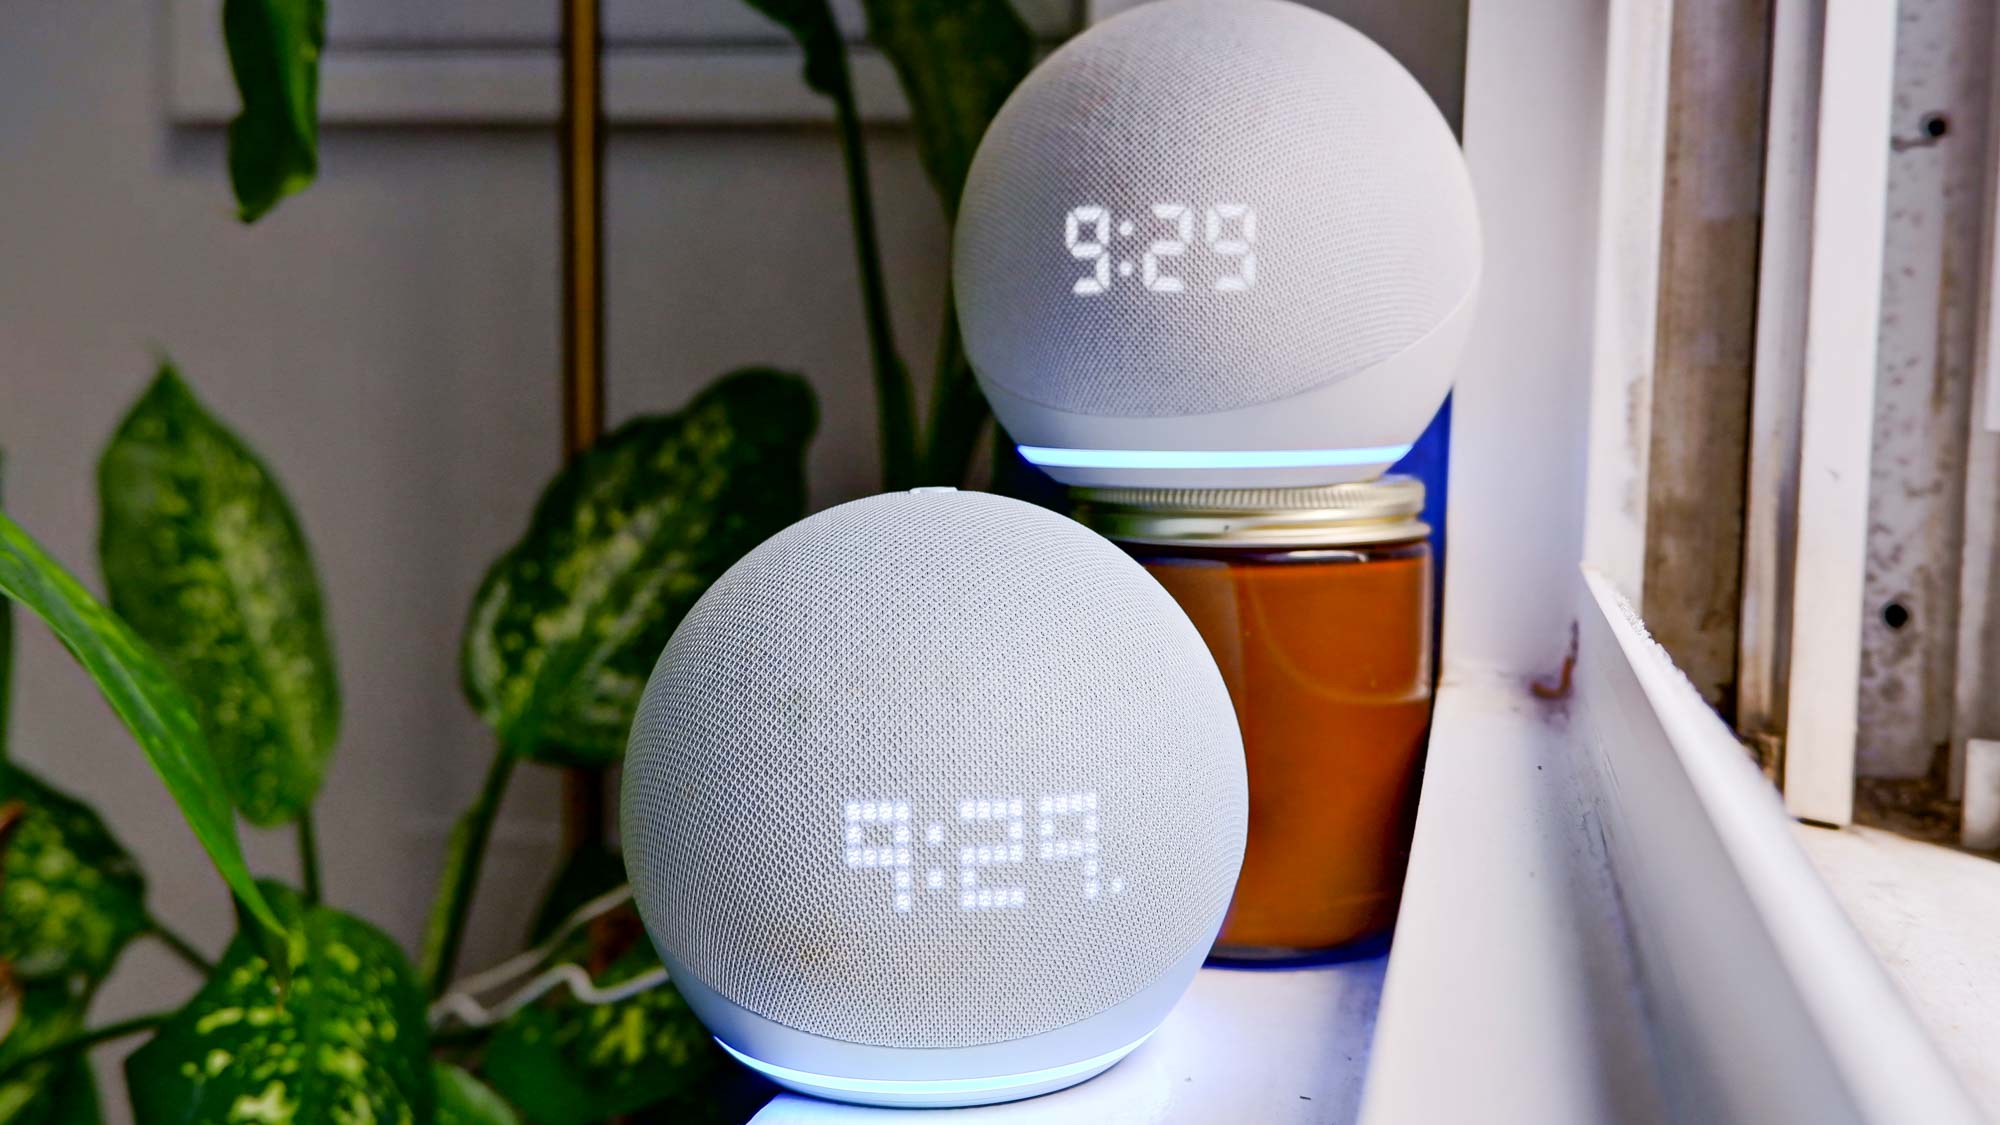 15 Alexa-Enabled Smart Home Gifts That Tech People Will Love